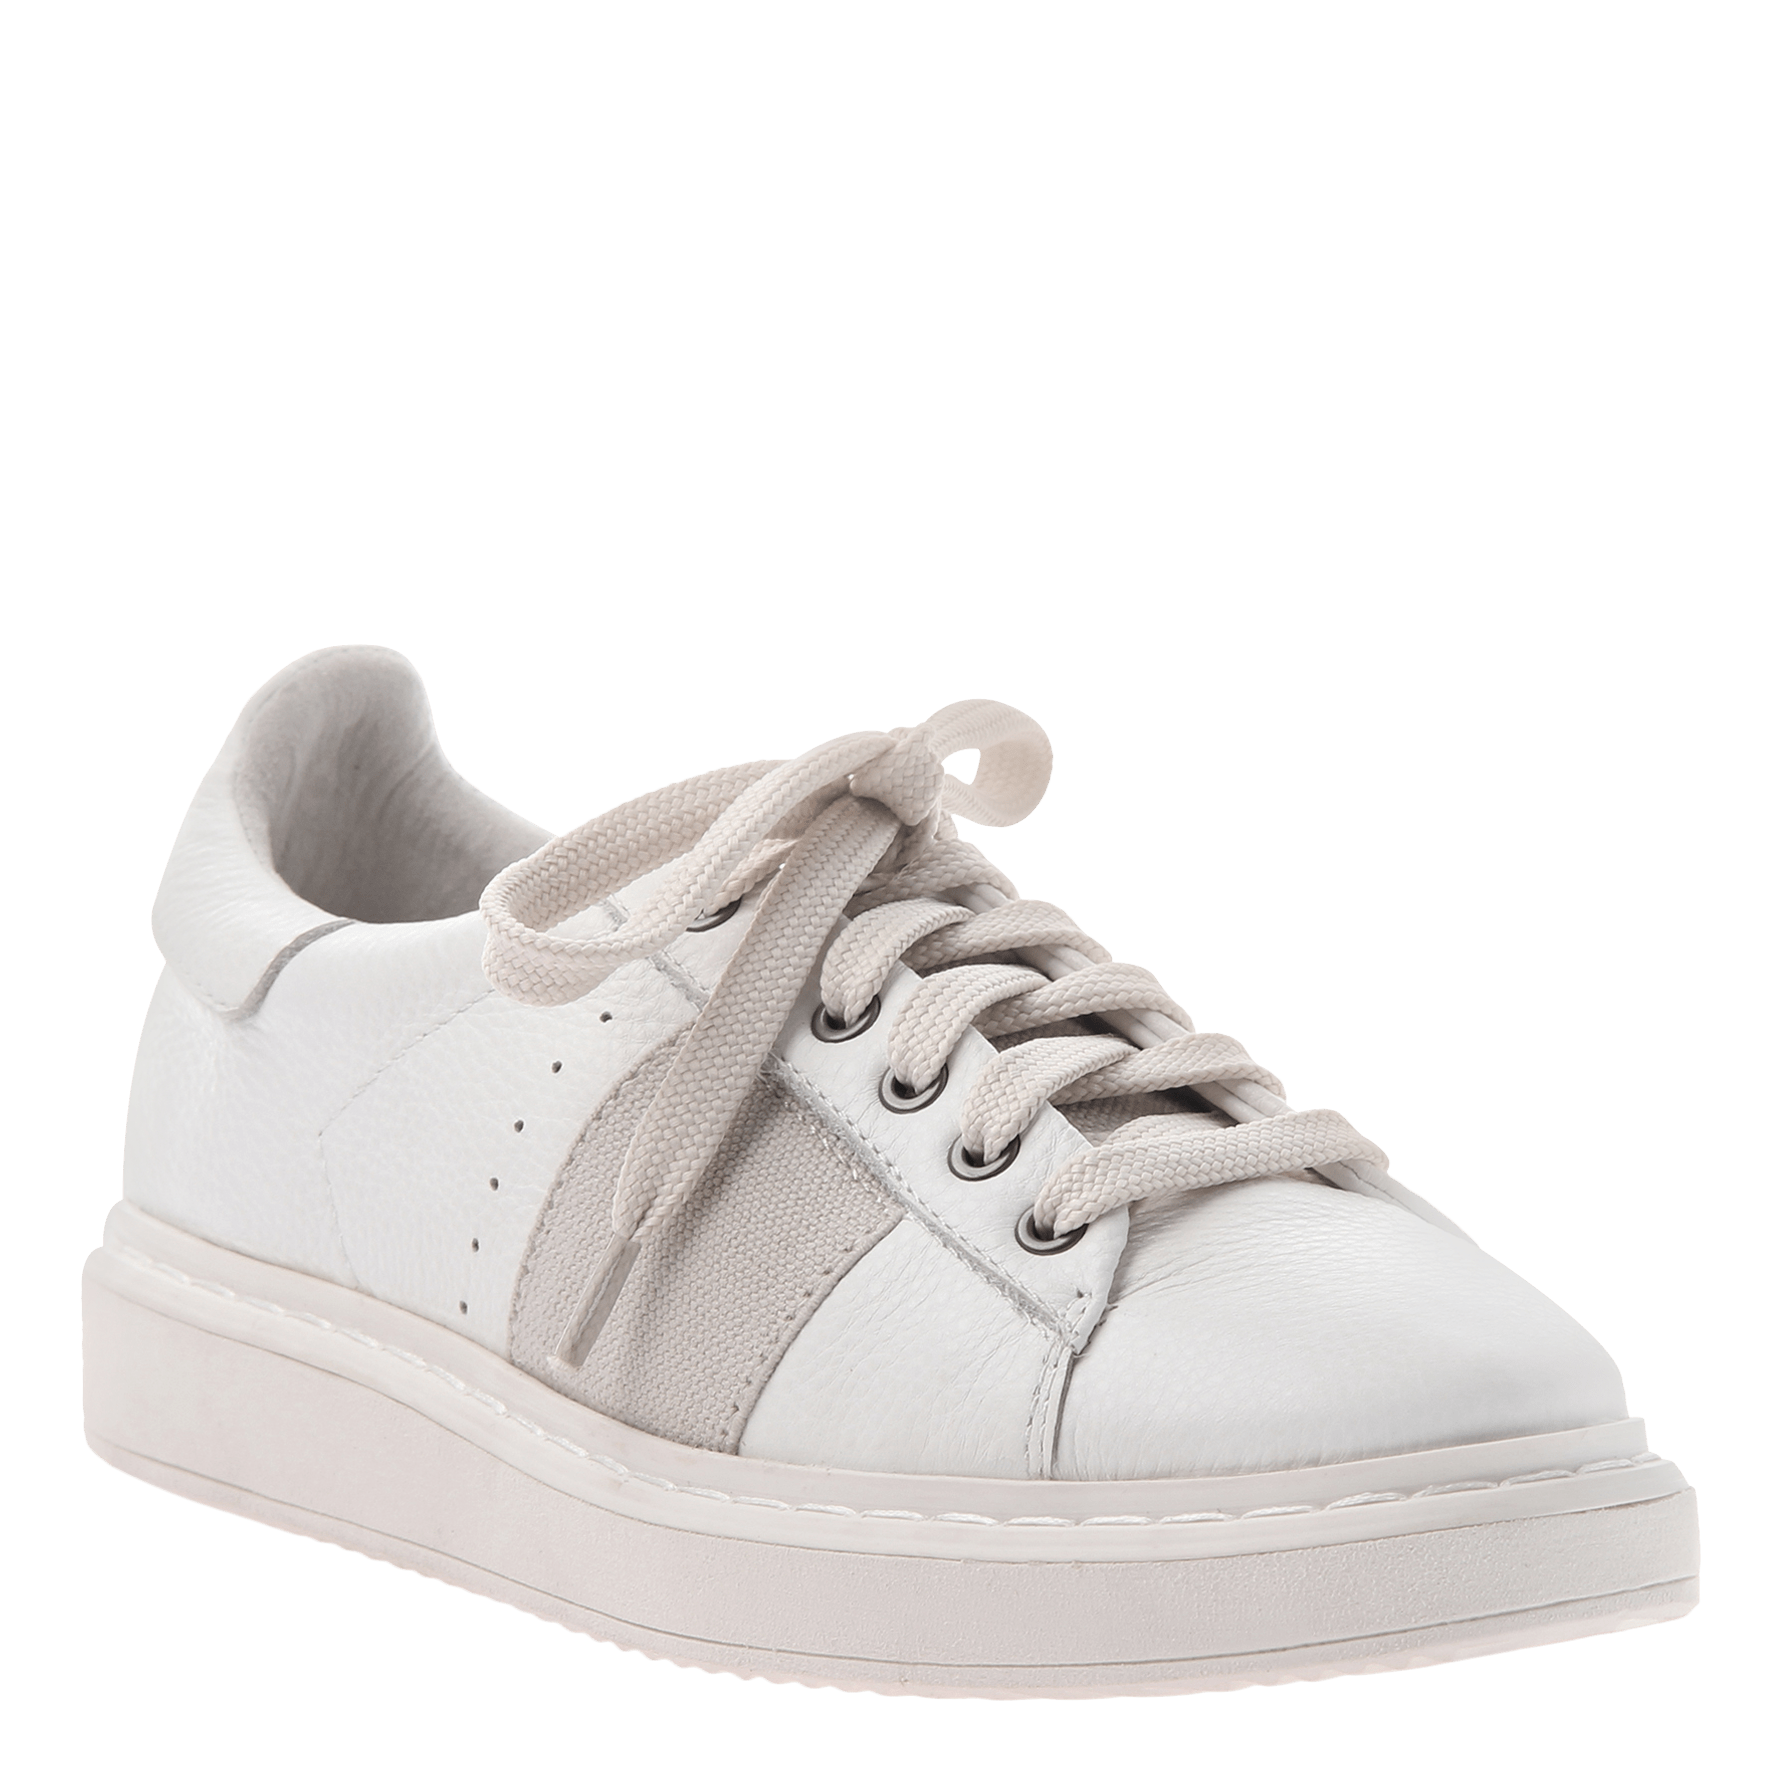 white womans sneakers